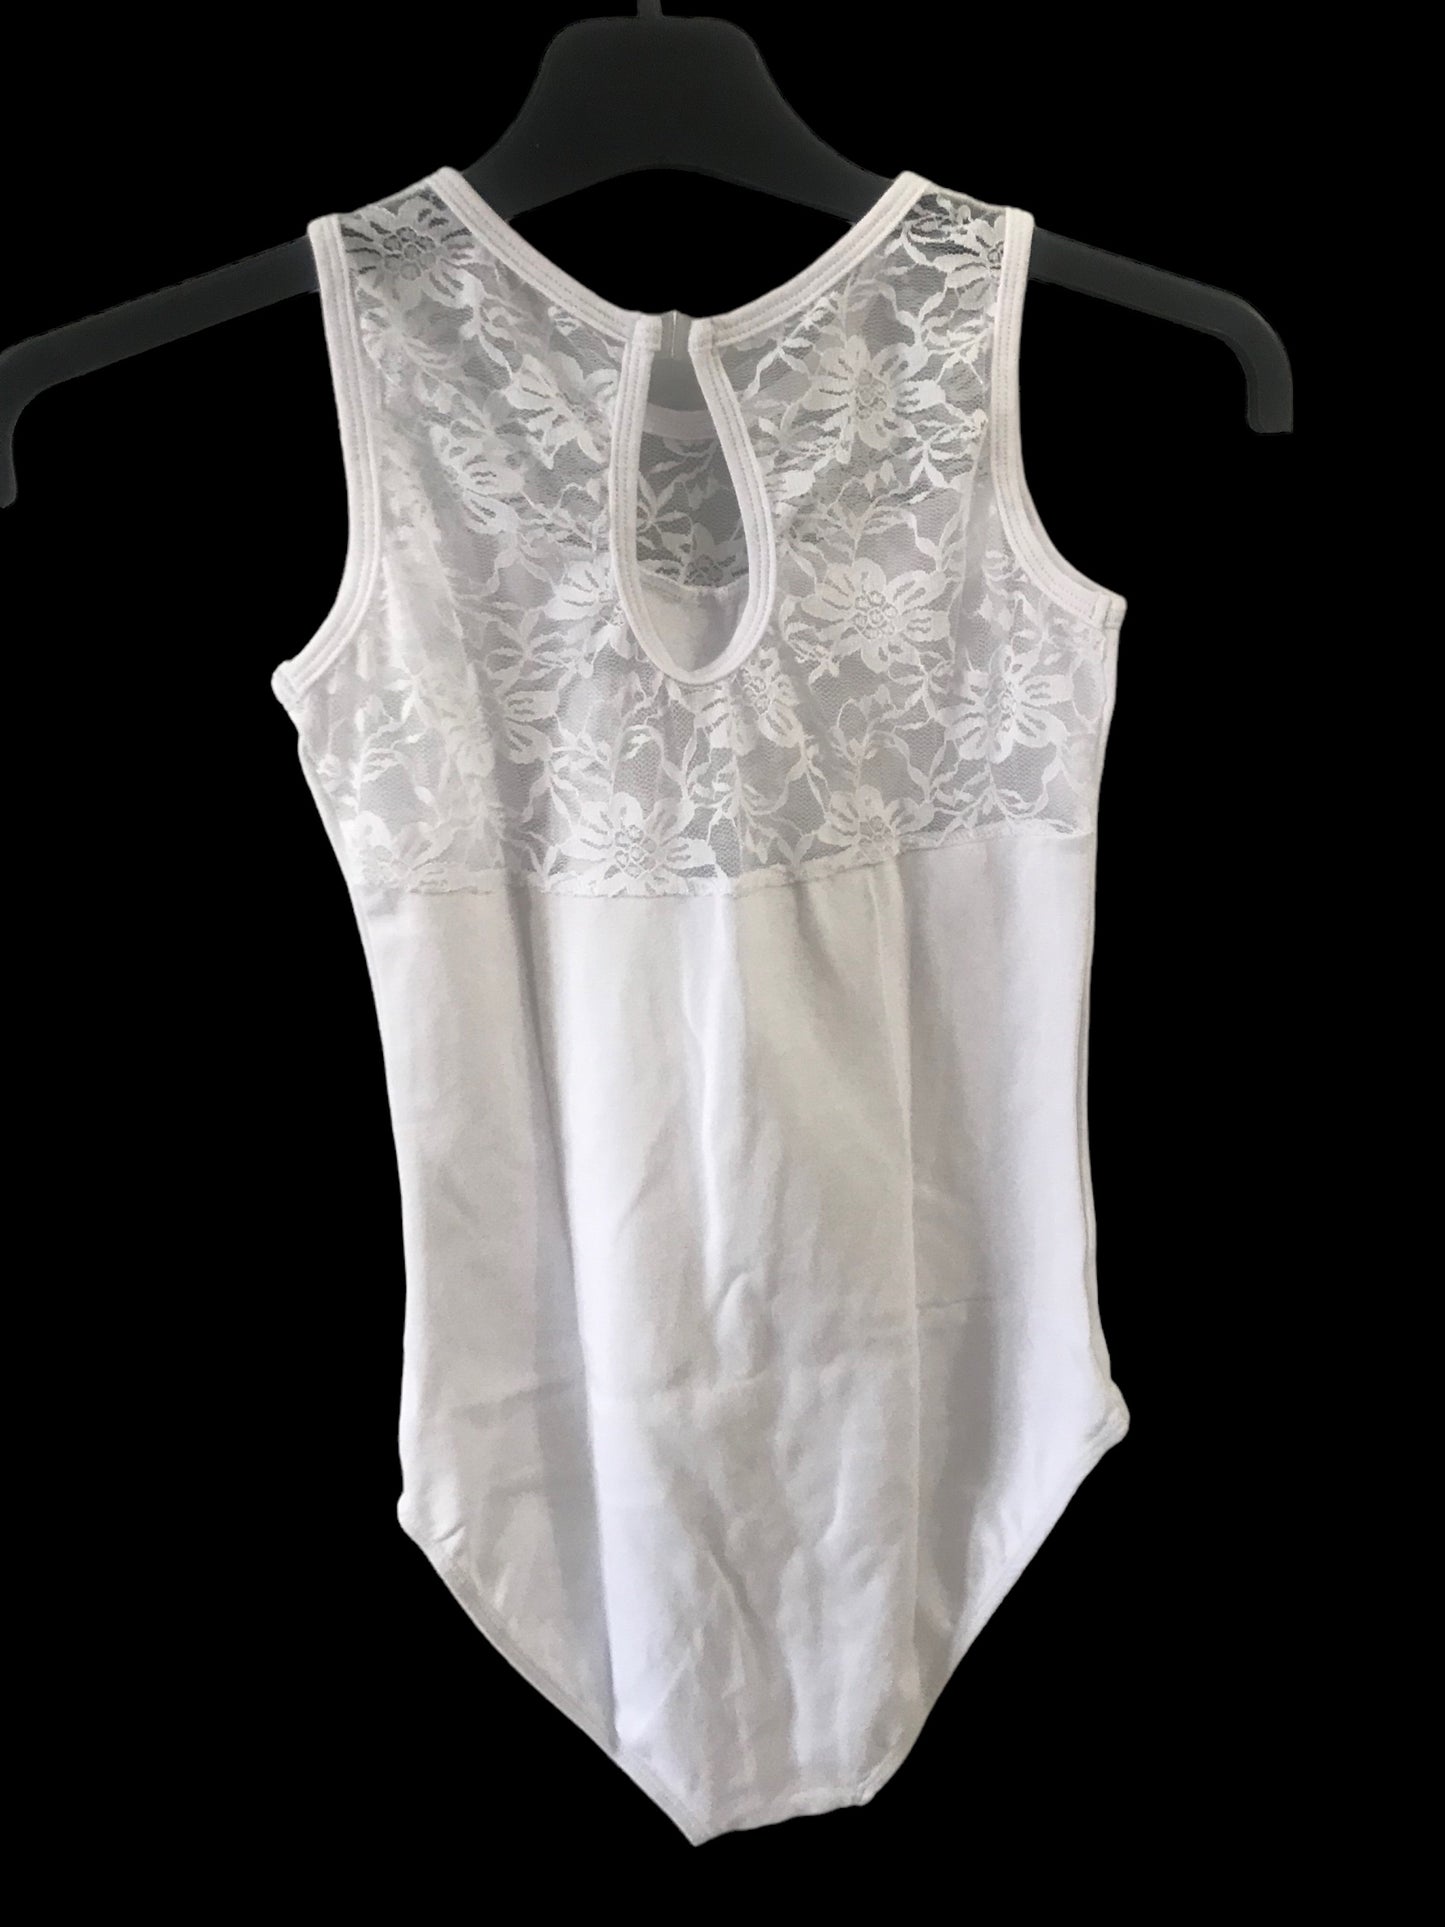 Cotton and lace leotard